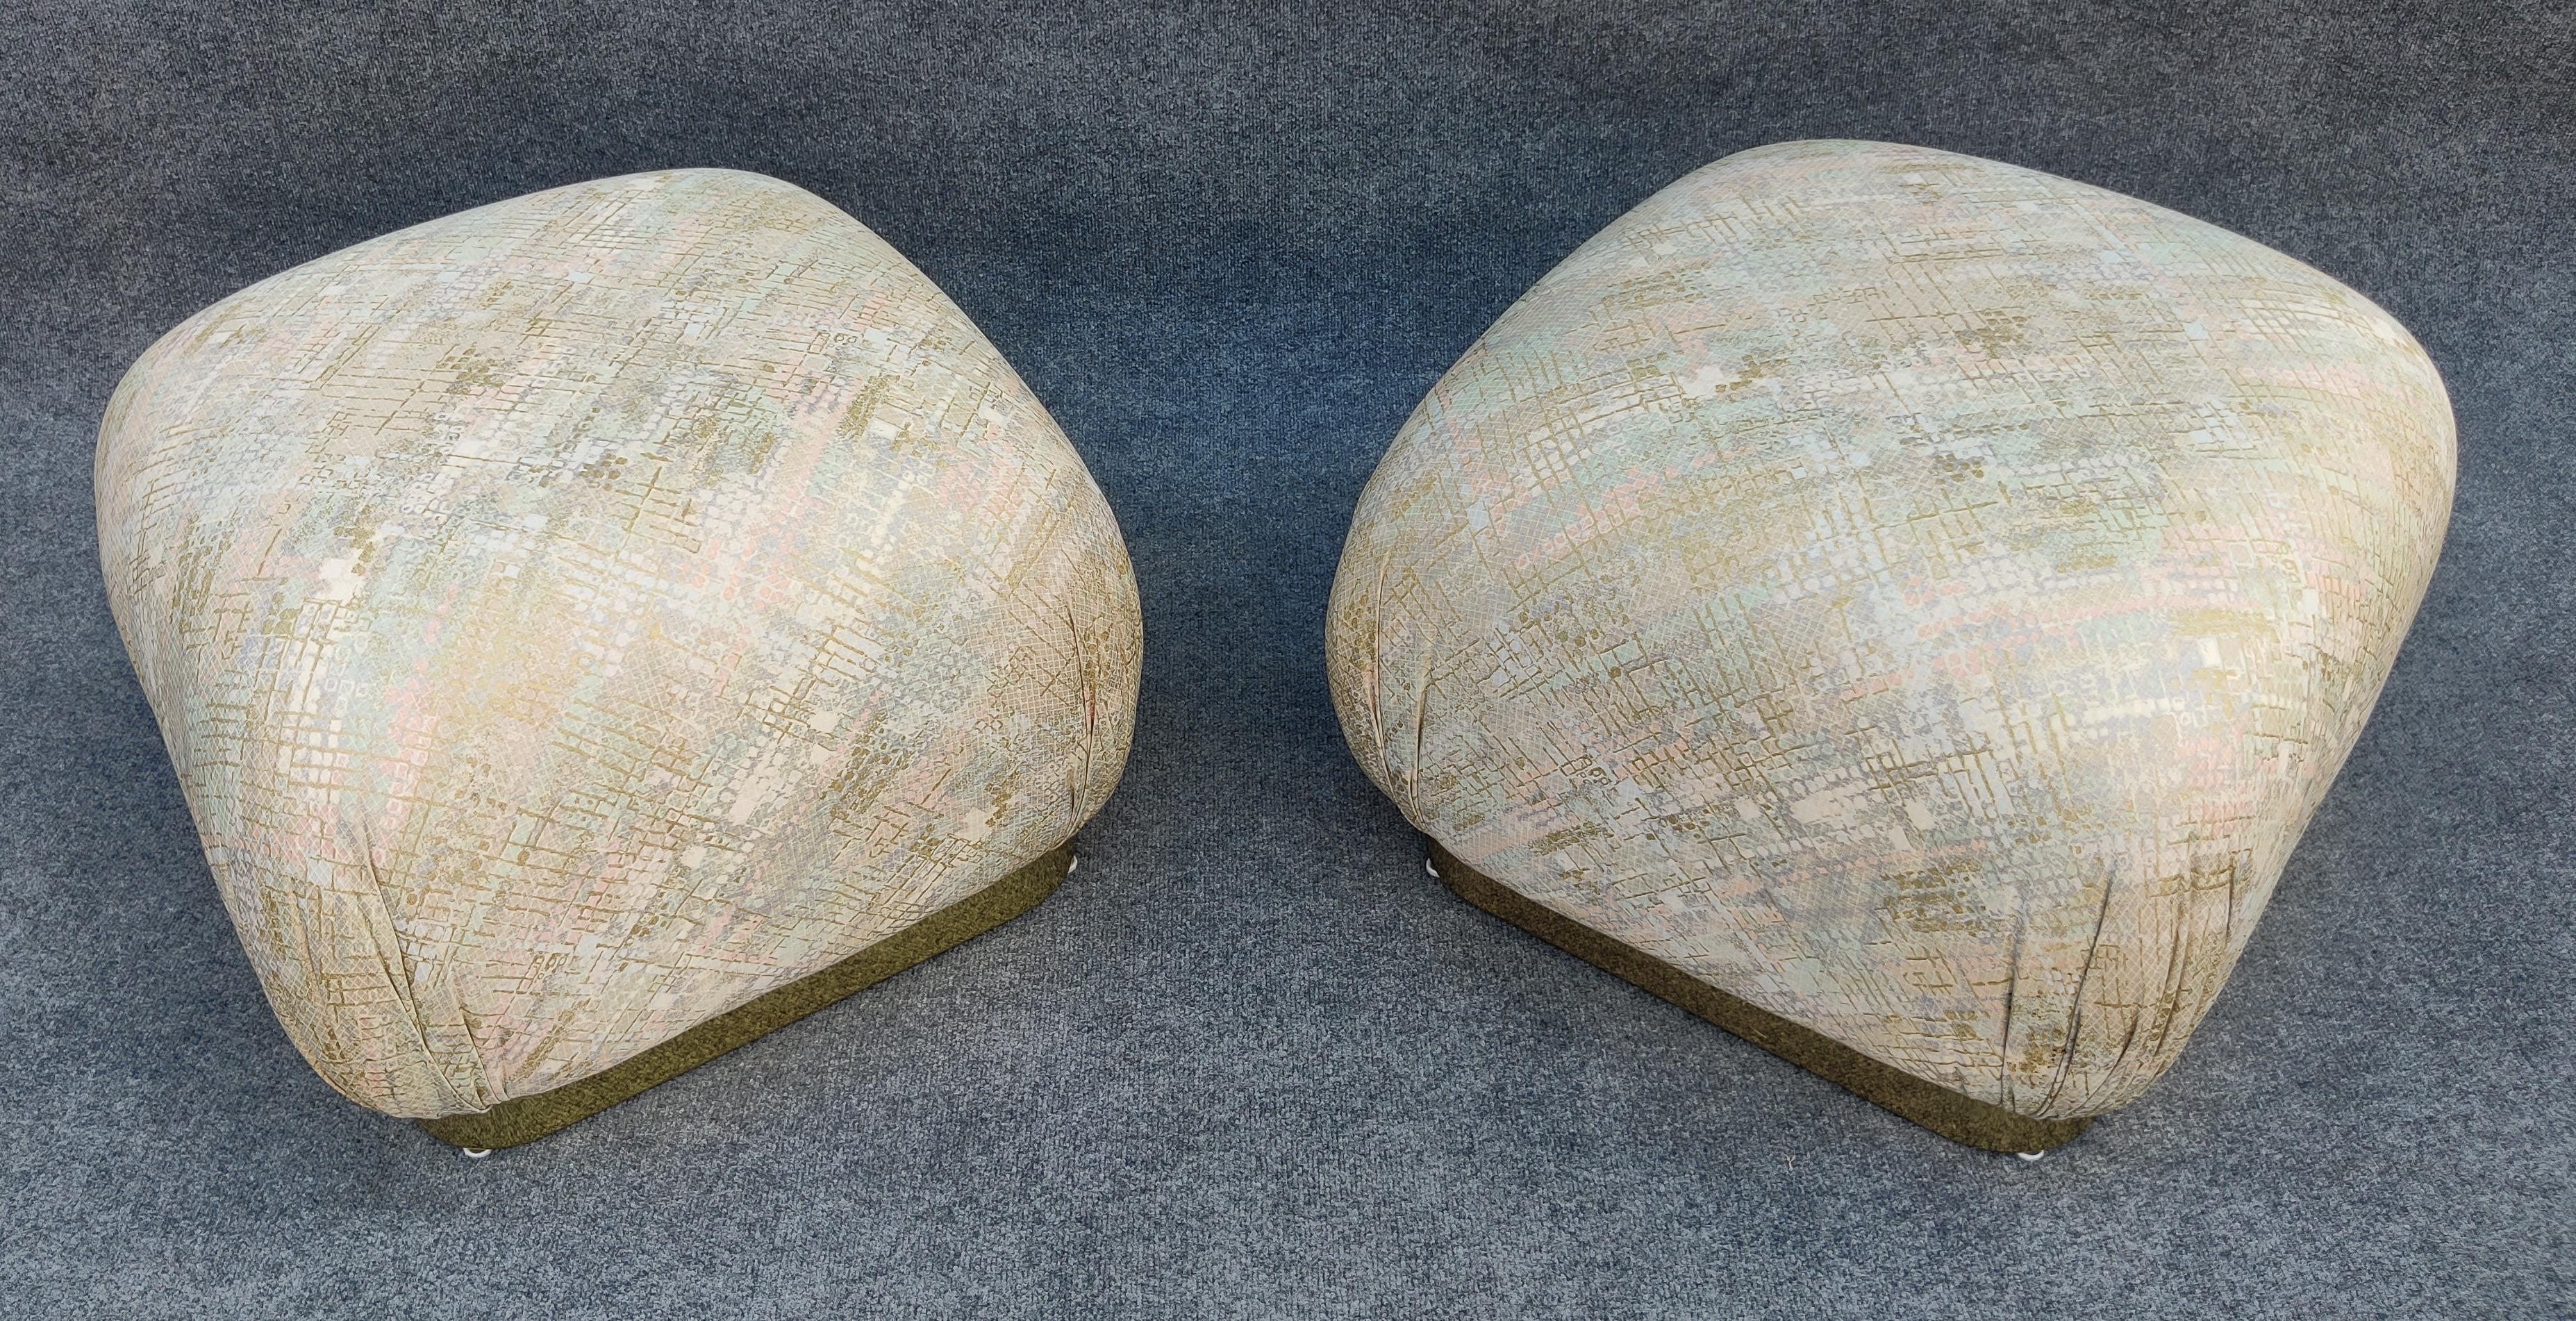 This pair of poufs or ottomans were made in the 1980s after the design was made iconic by Karl Springer. On a base of brass plated sheet metal over a wooden frame, this pair is upholstered in a pleasing tesselated, almost floral pattern. They are